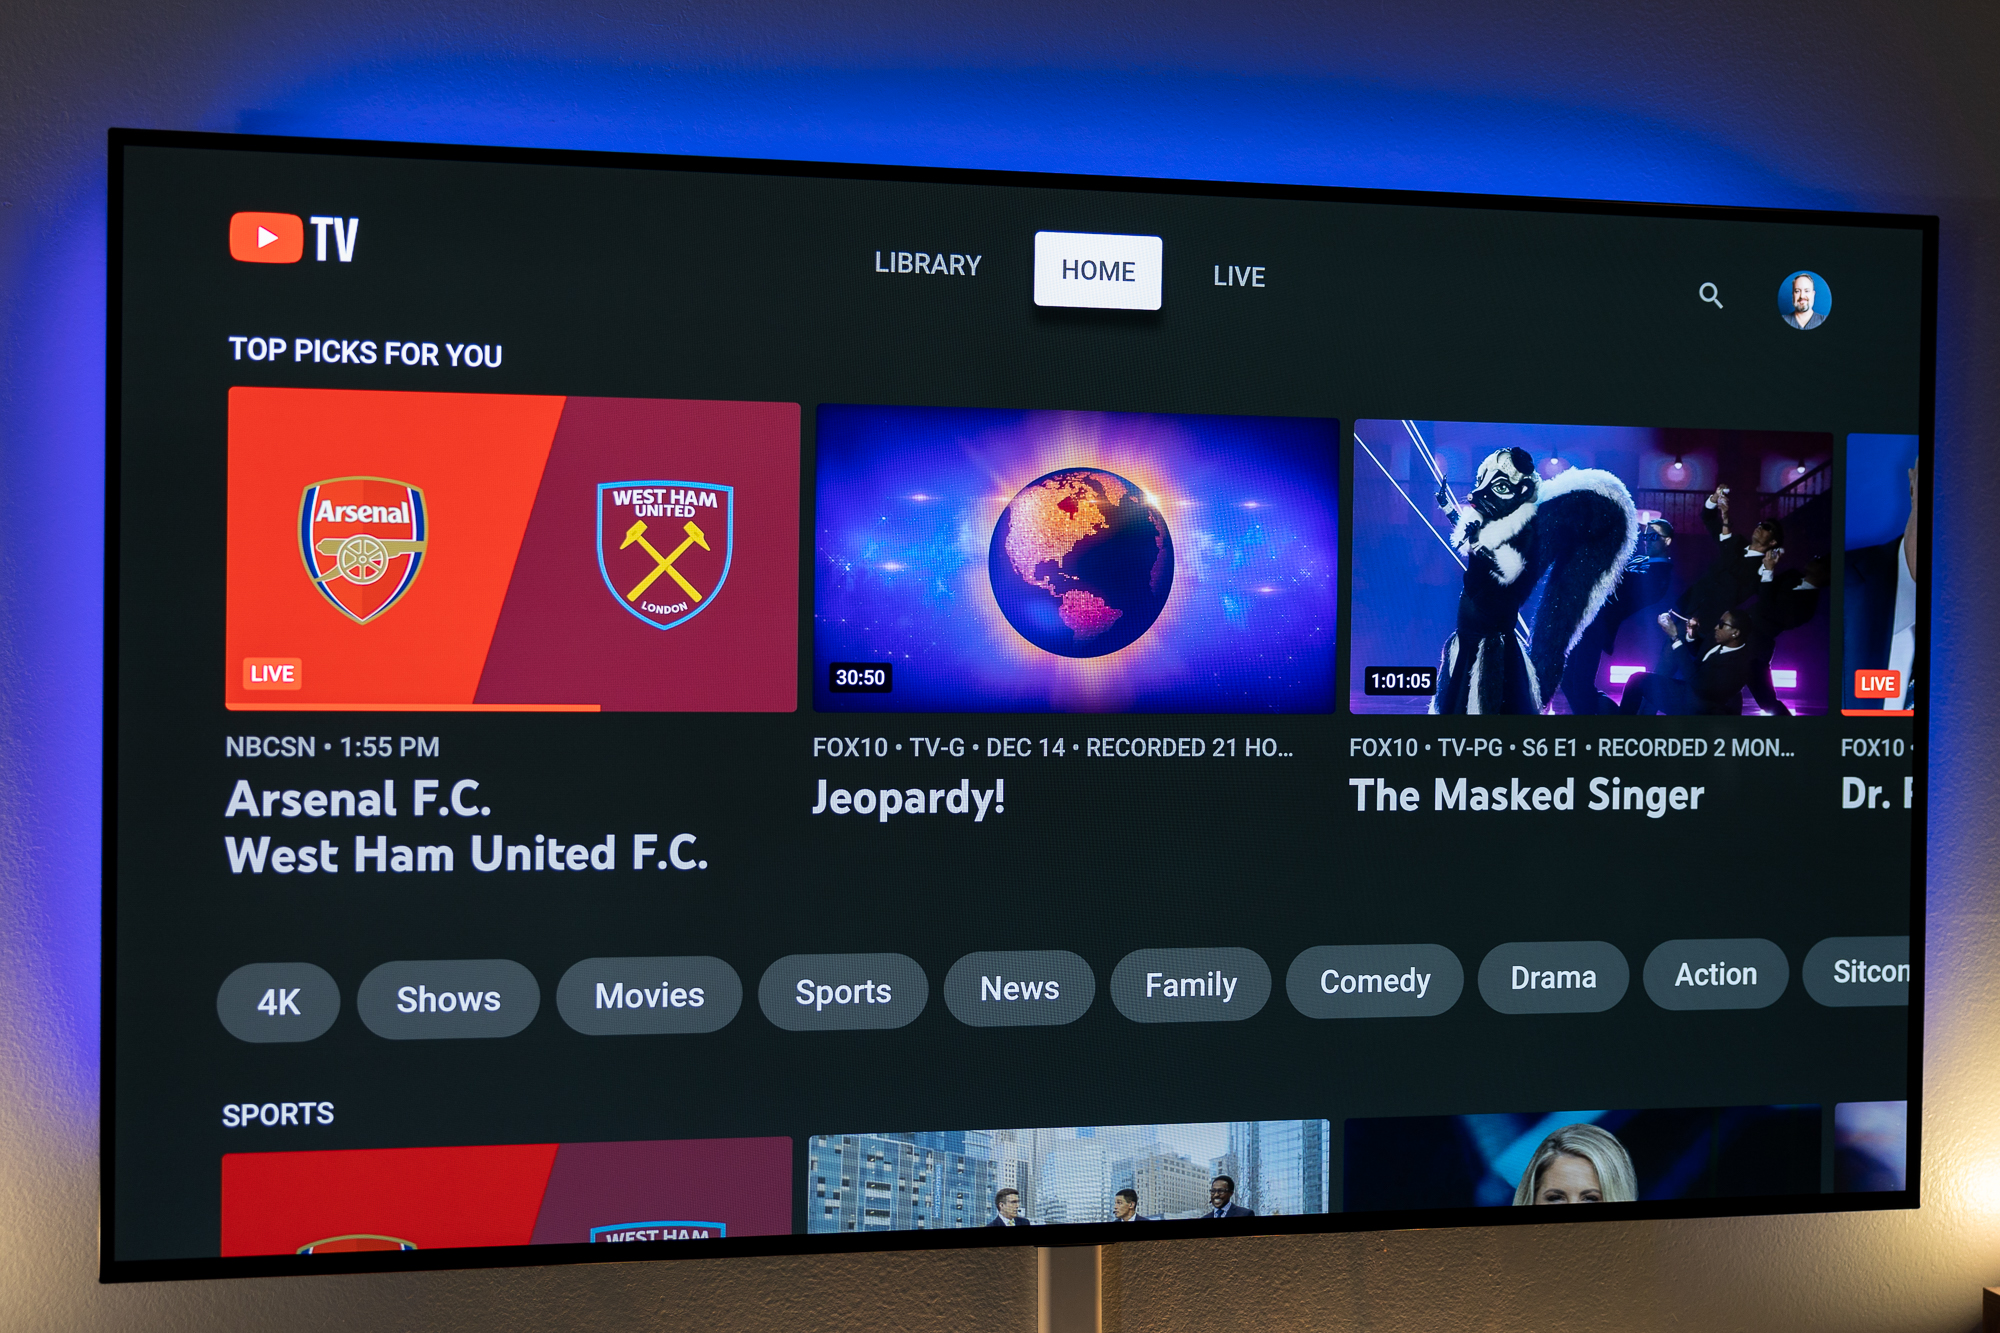 Youtube Tv Couldn'T Have Picked A Worse Time To Lose Espn | Digital Trends